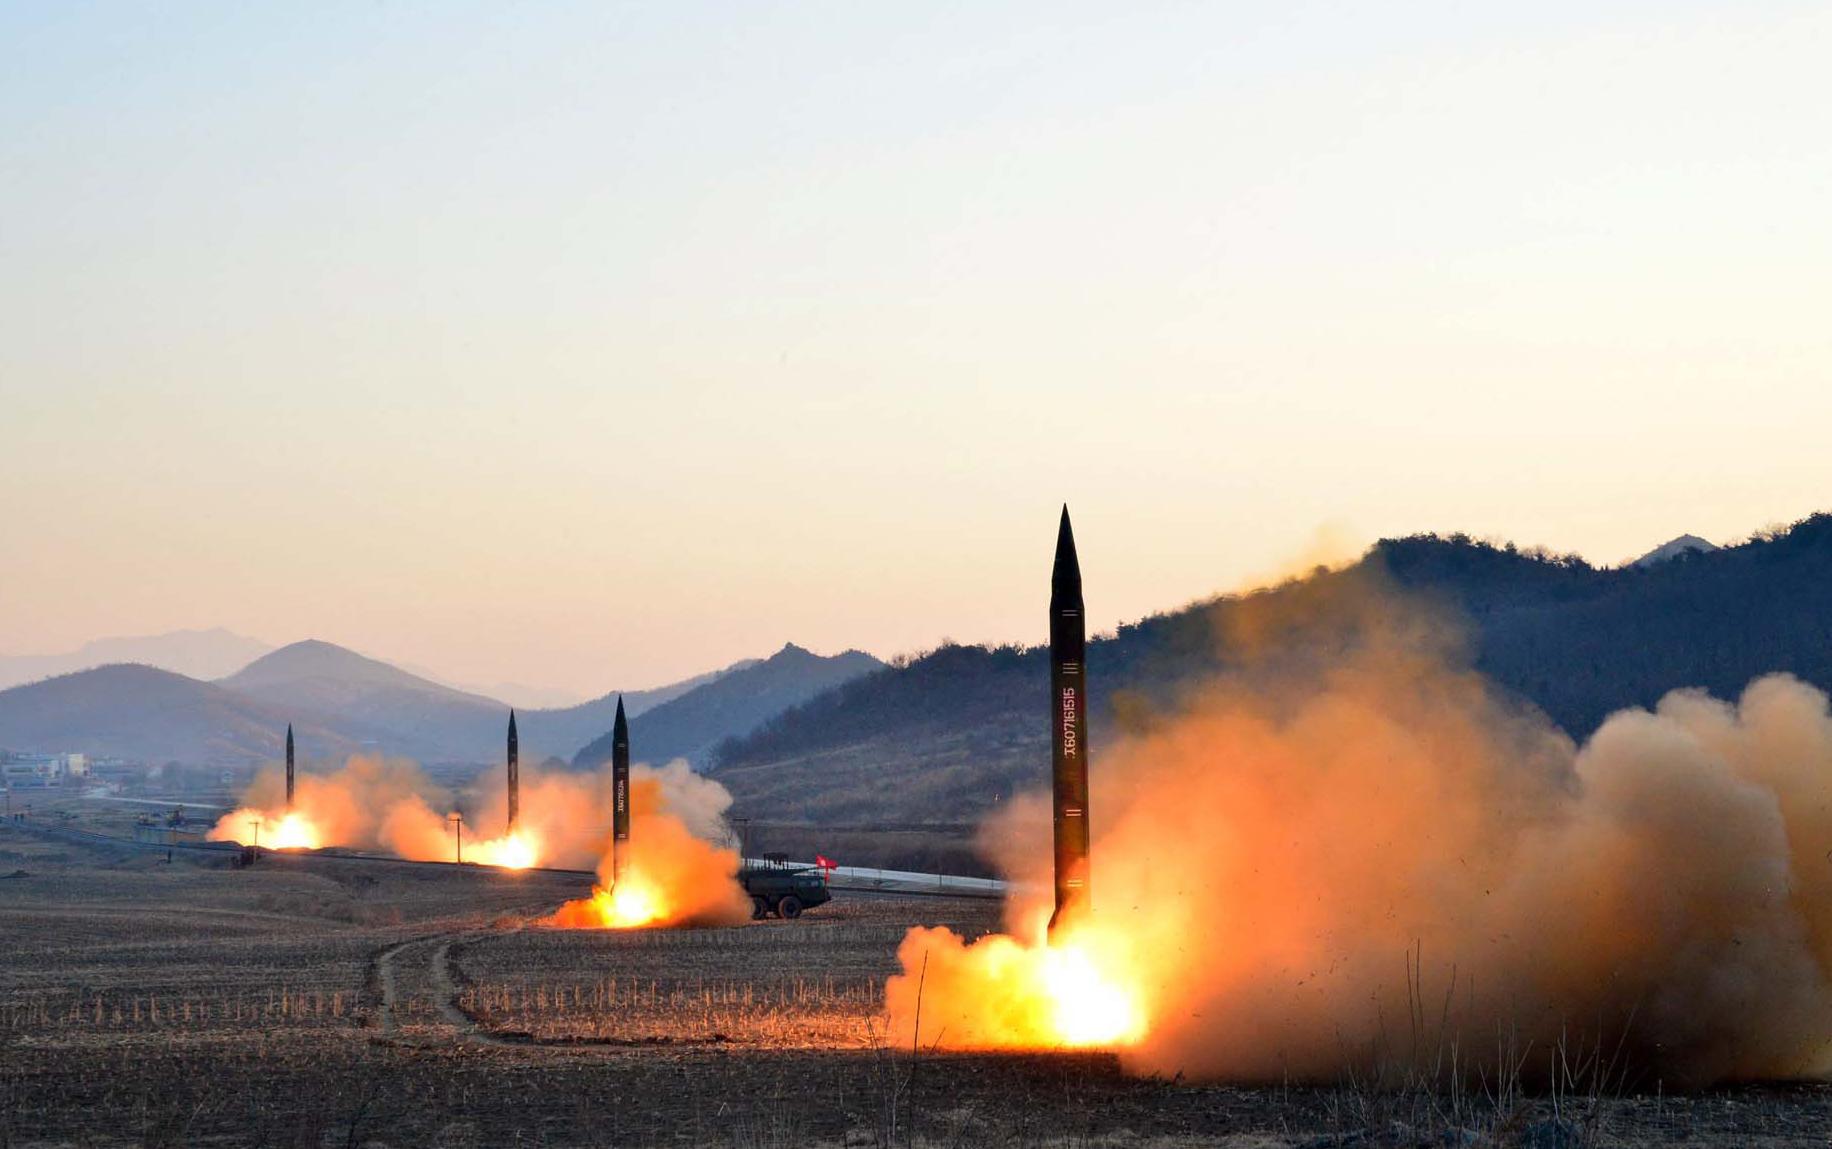 This undated picture released by North Korea's Korean Central News Agency (KCNA) via KNS on March 7, 2017 shows the launch of four ballistic missiles by the Korean People's Army (KPA) during a military drill at an undisclosed location in North Korea.